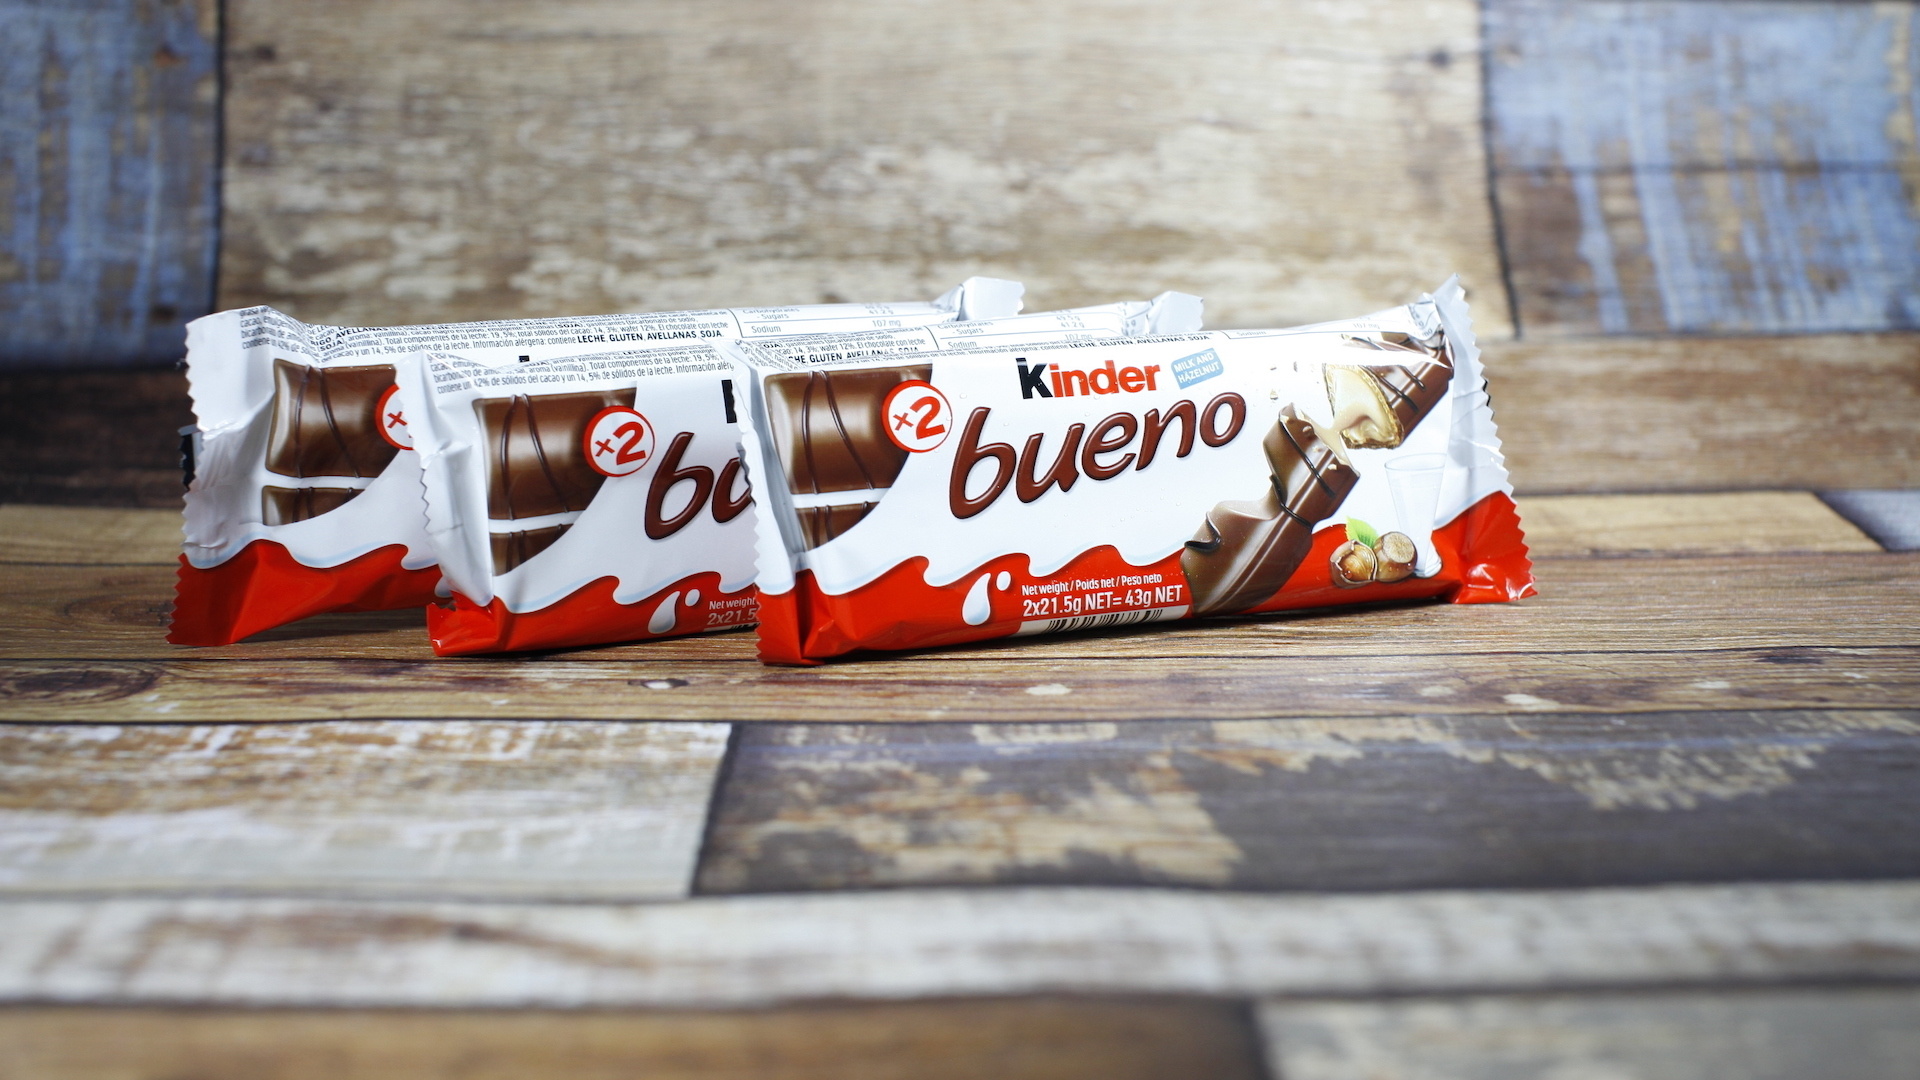 Kinder (Brand): Bueno Bars, Confection made by Italian confectionery maker Ferrero. 1920x1080 Full HD Background.